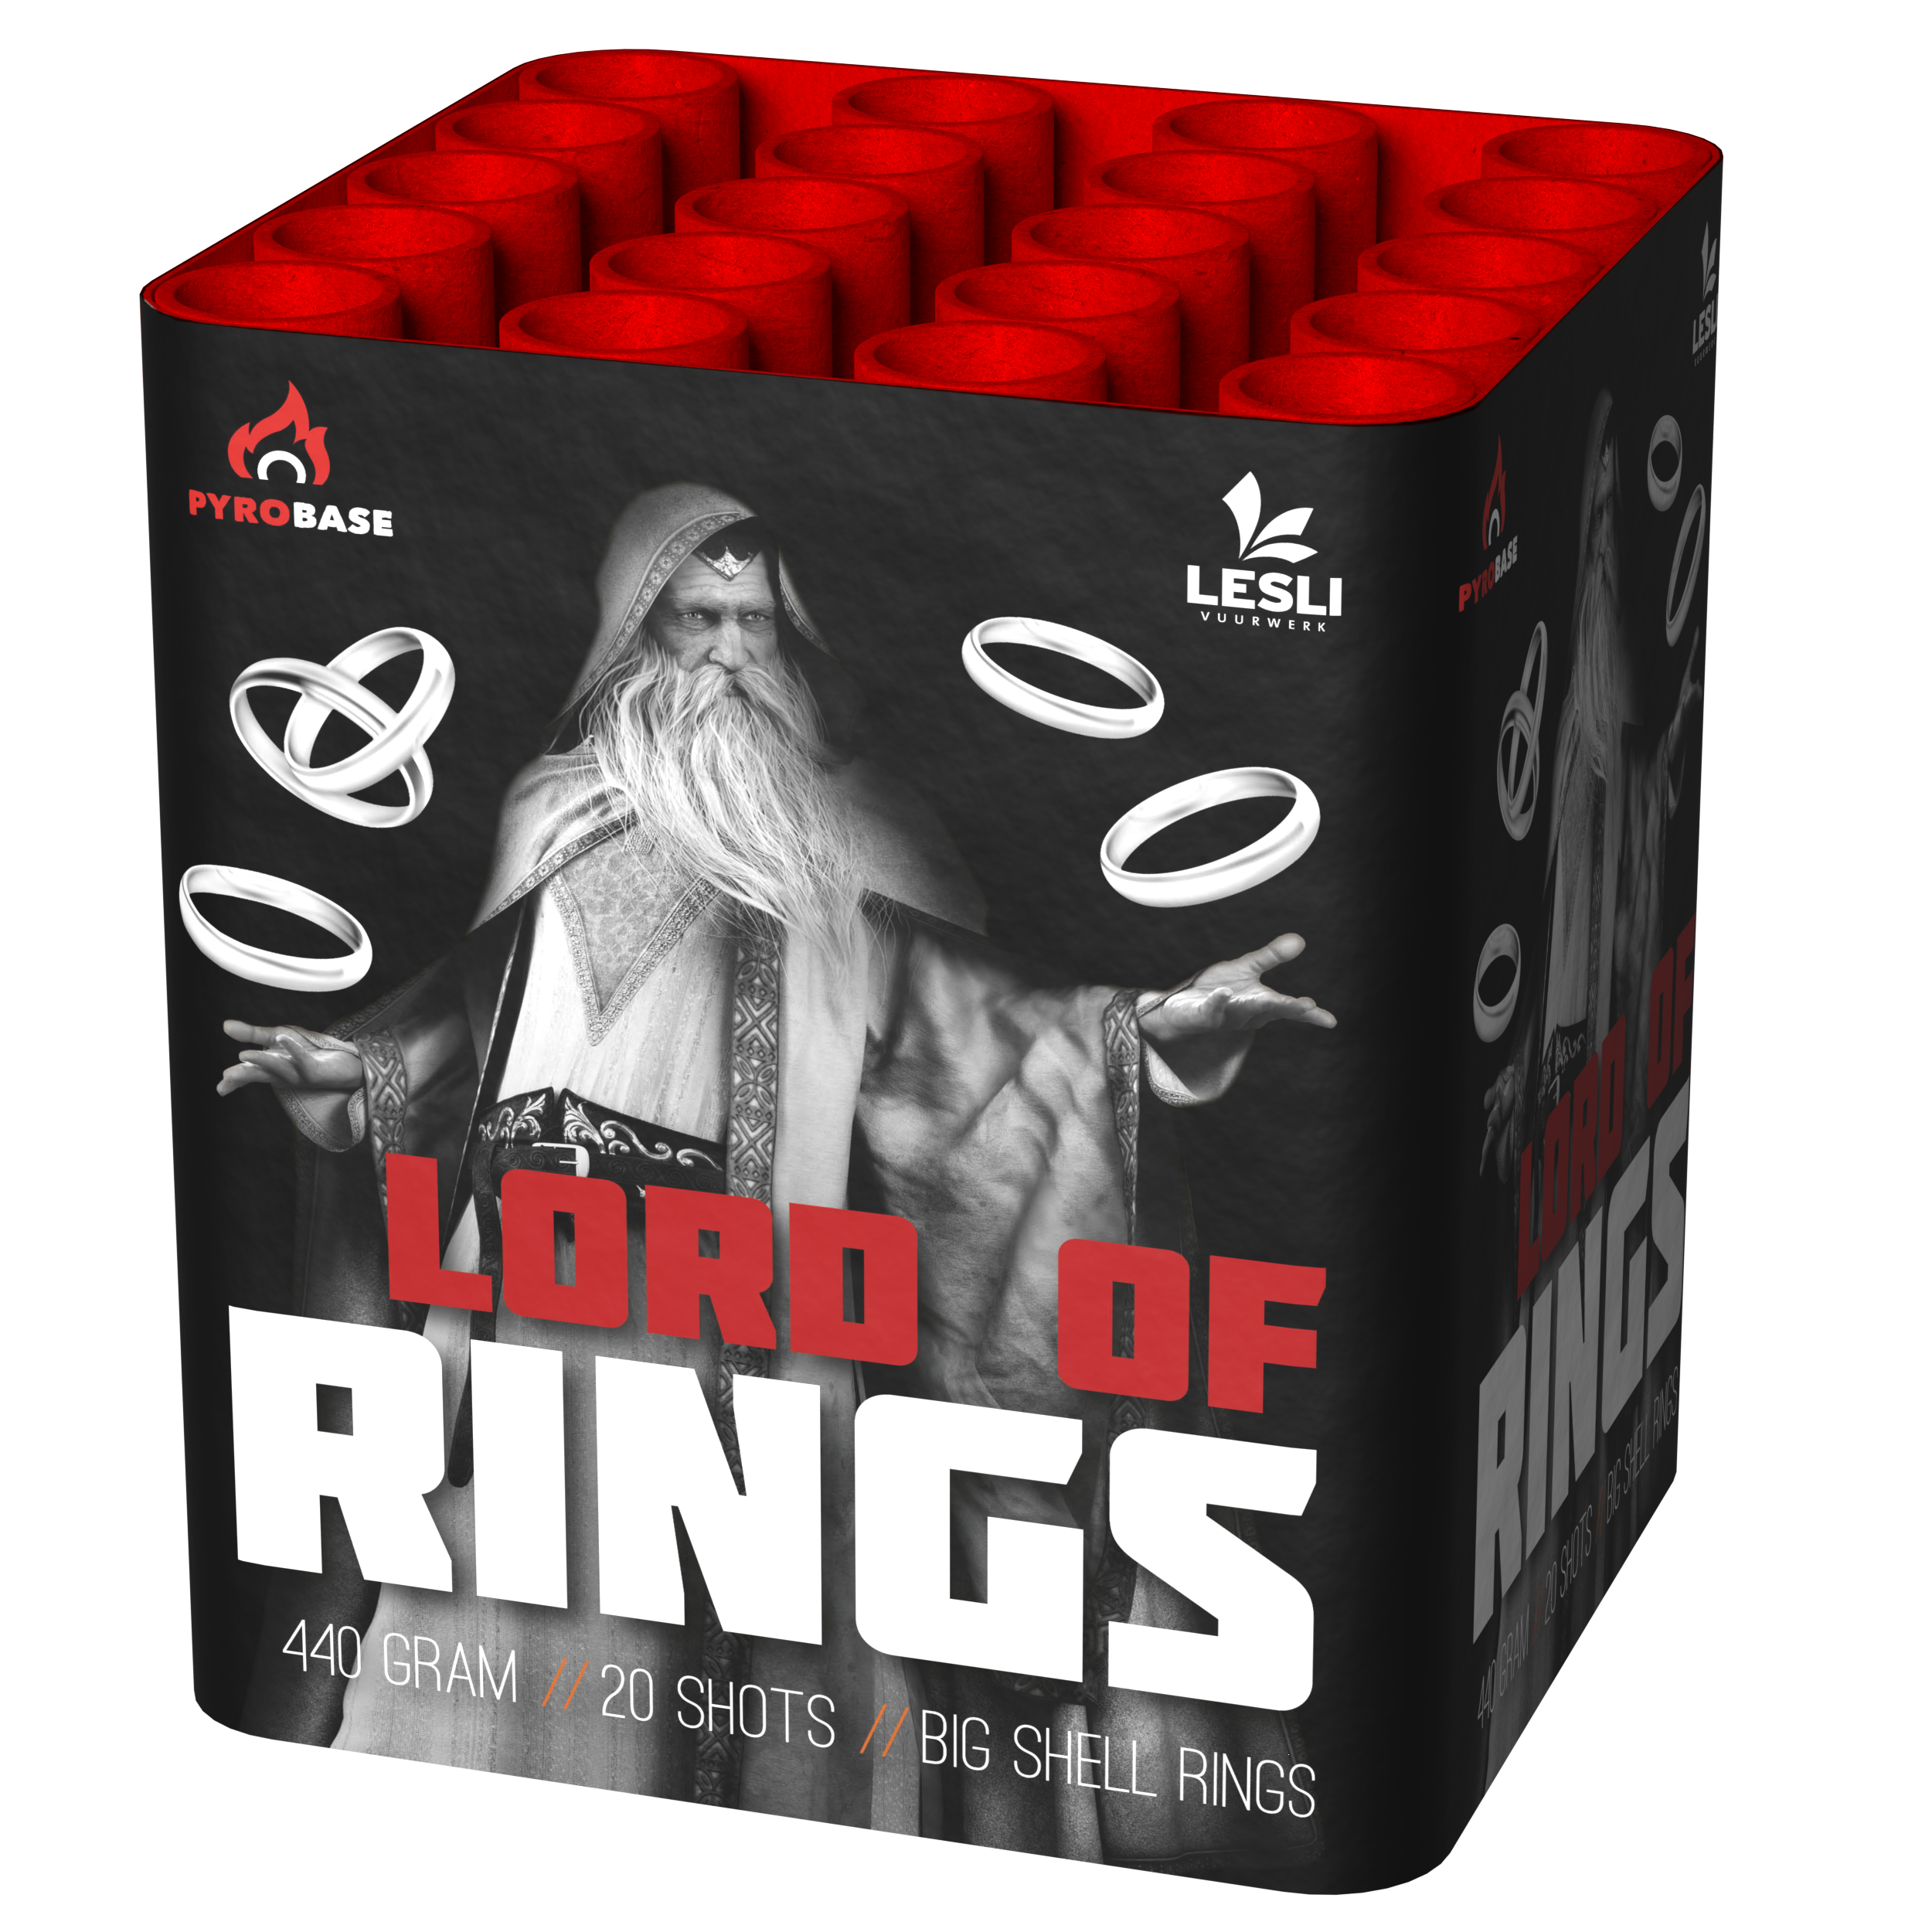 03845 Lord of rings.png